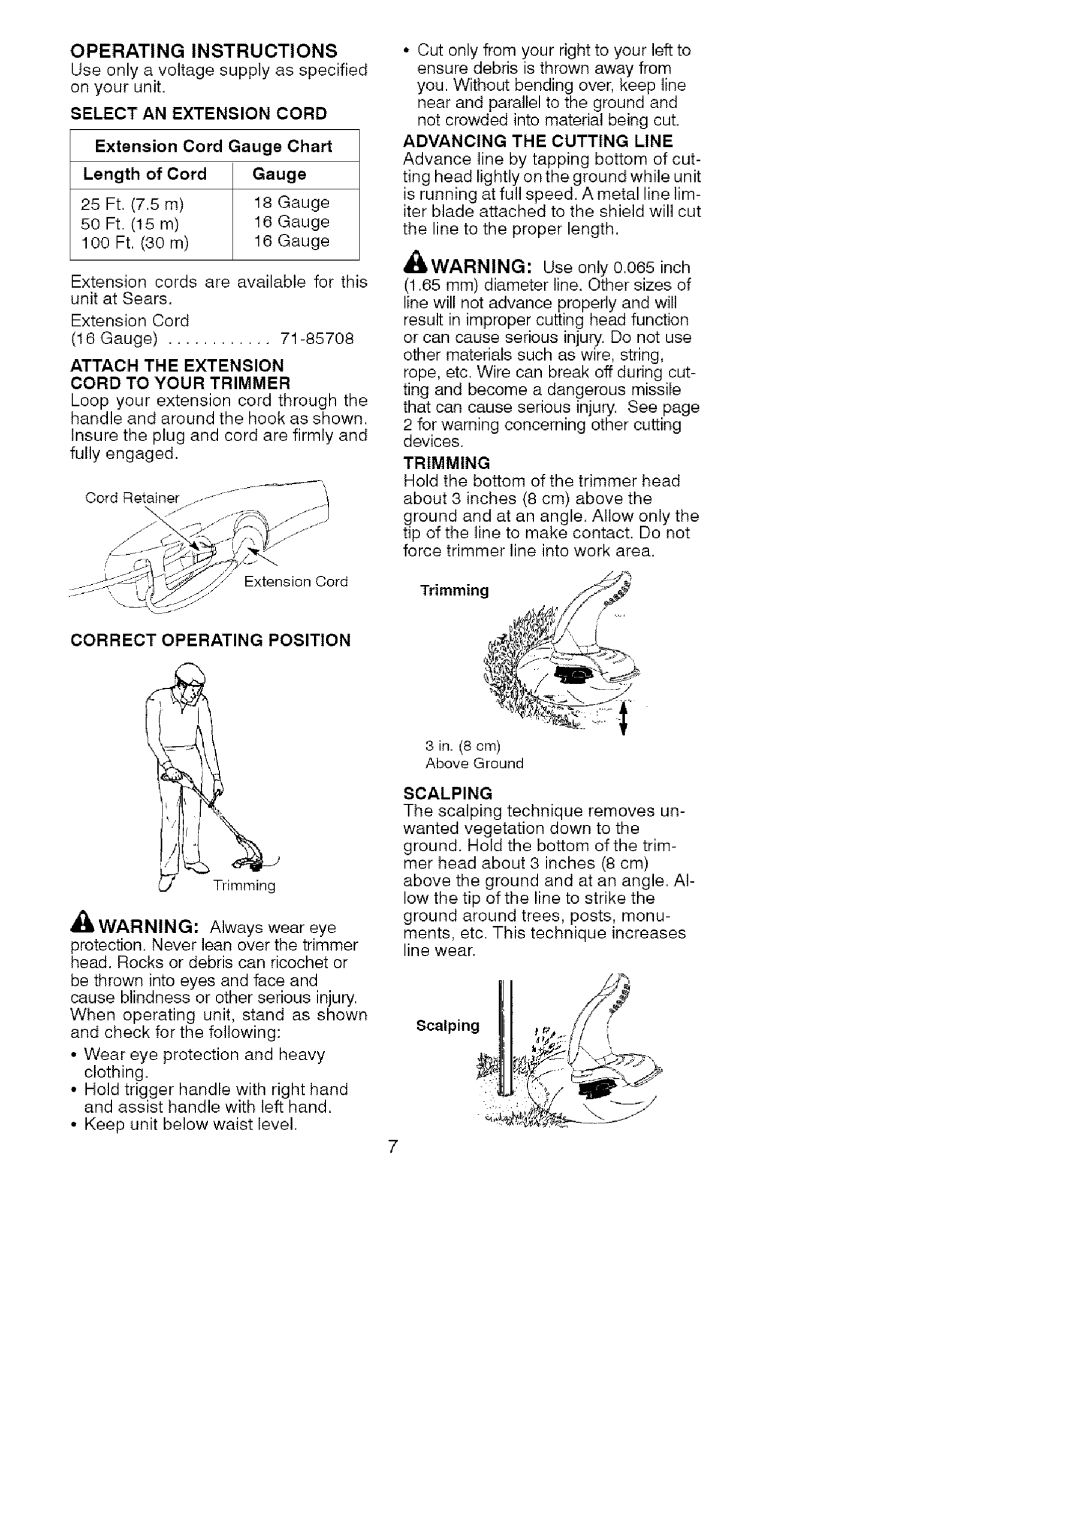 Craftsman 358.74534 Sea,pingII, Operatinginstructions, Attach The Extension Cord To Your Trimmer, Trimming, Scalping 